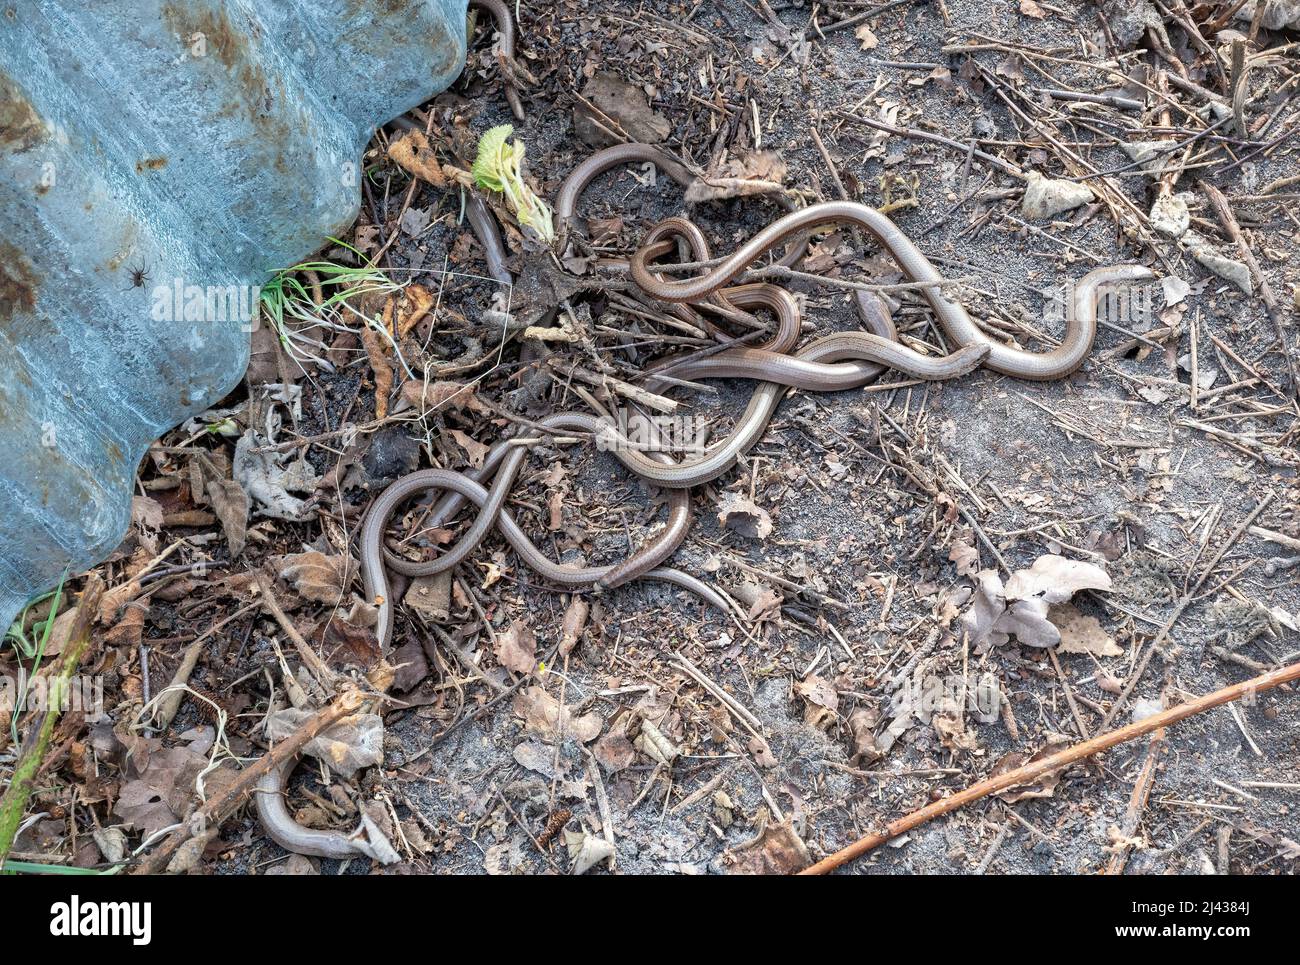 Lots of slow worms (Anguis fragilis) under a corrugated metal refugia used to survey reptiles, UK Stock Photo